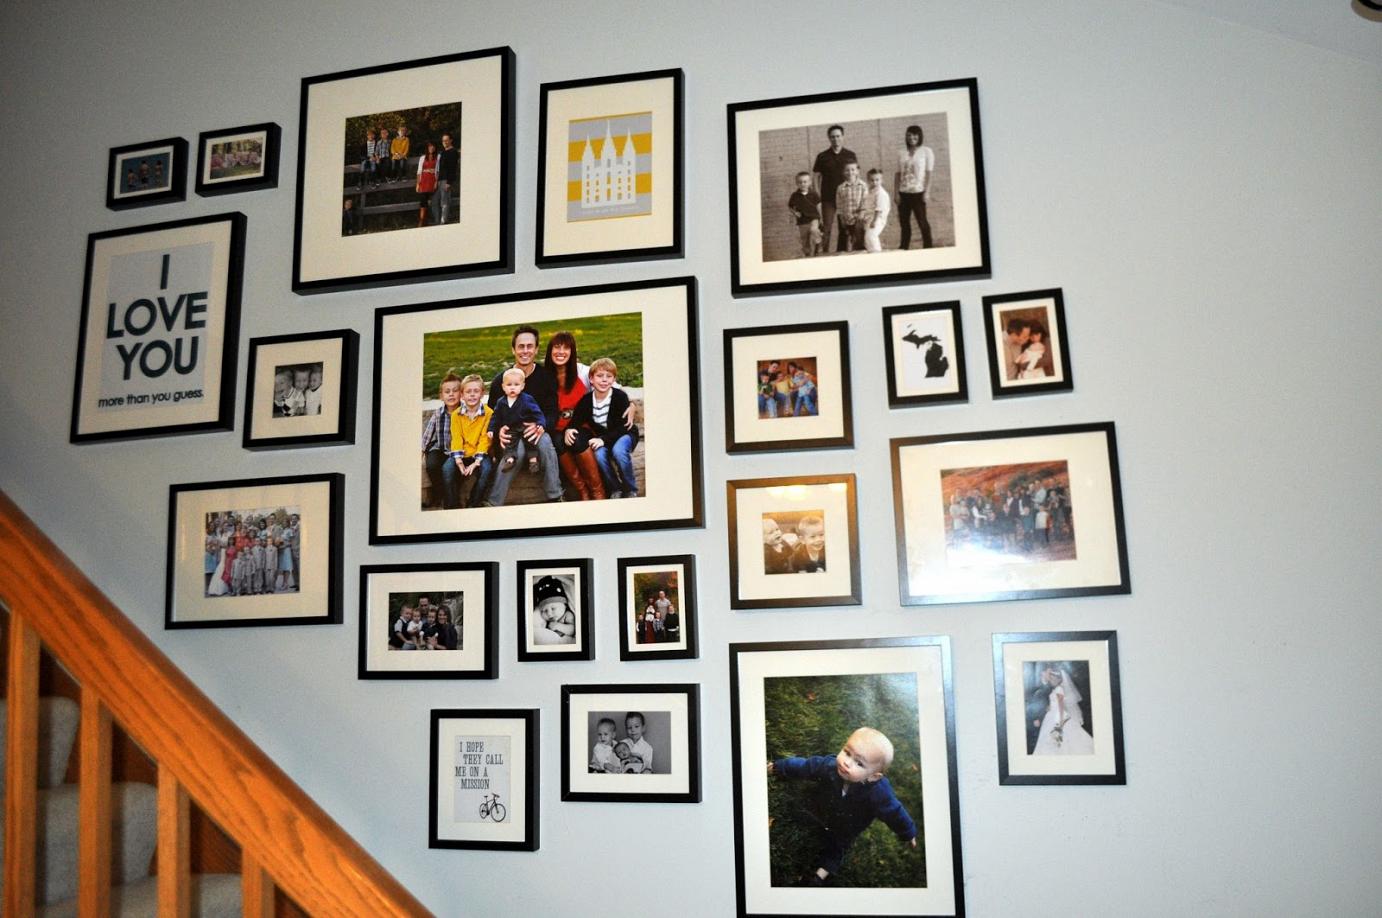 family-picture-hanging-ideas-for-hallway-staircase-design-with-black-frame-on-blue-wall-ideas